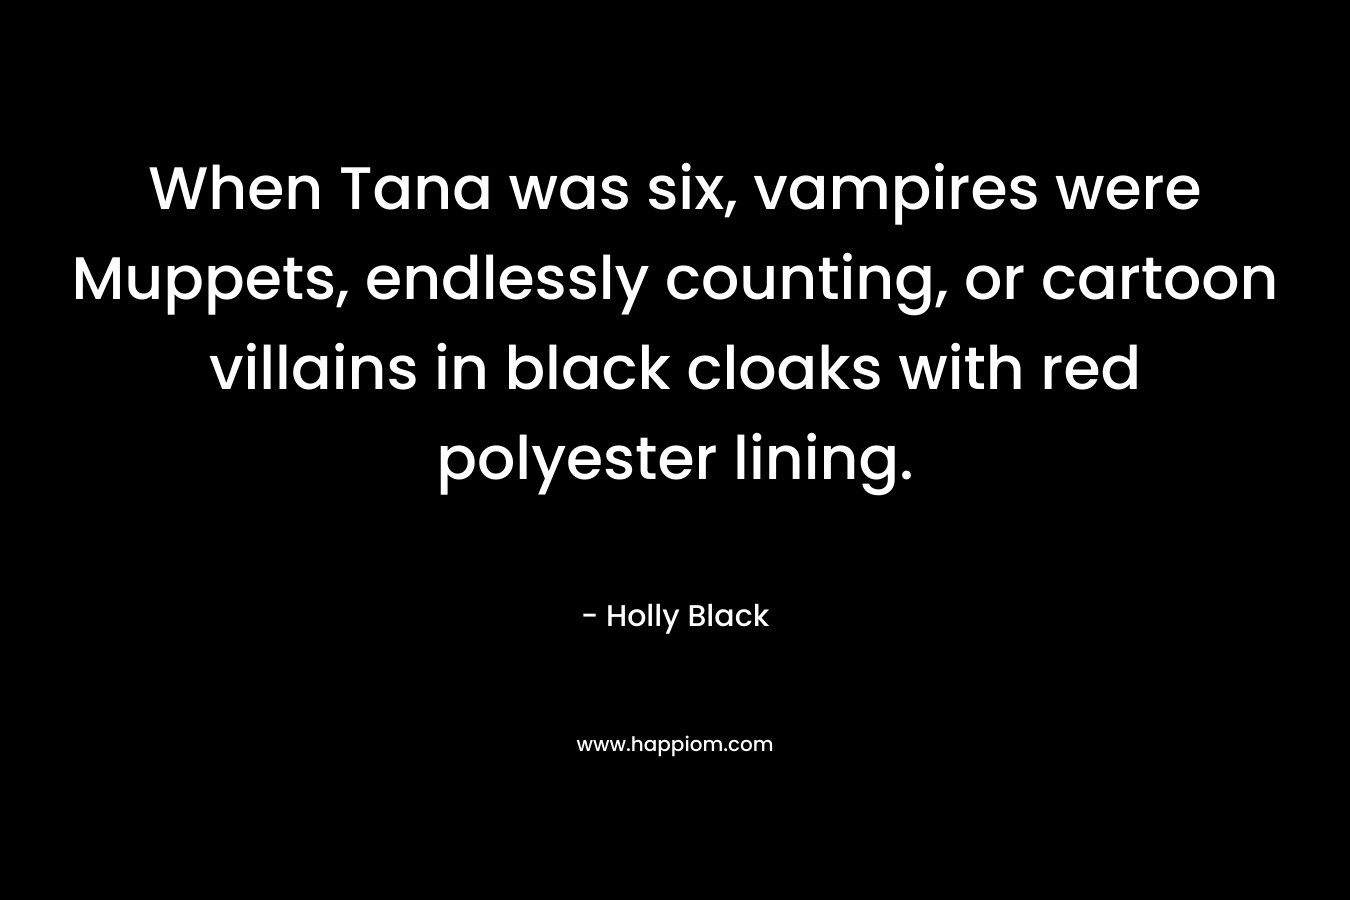 When Tana was six, vampires were Muppets, endlessly counting, or cartoon villains in black cloaks with red polyester lining.